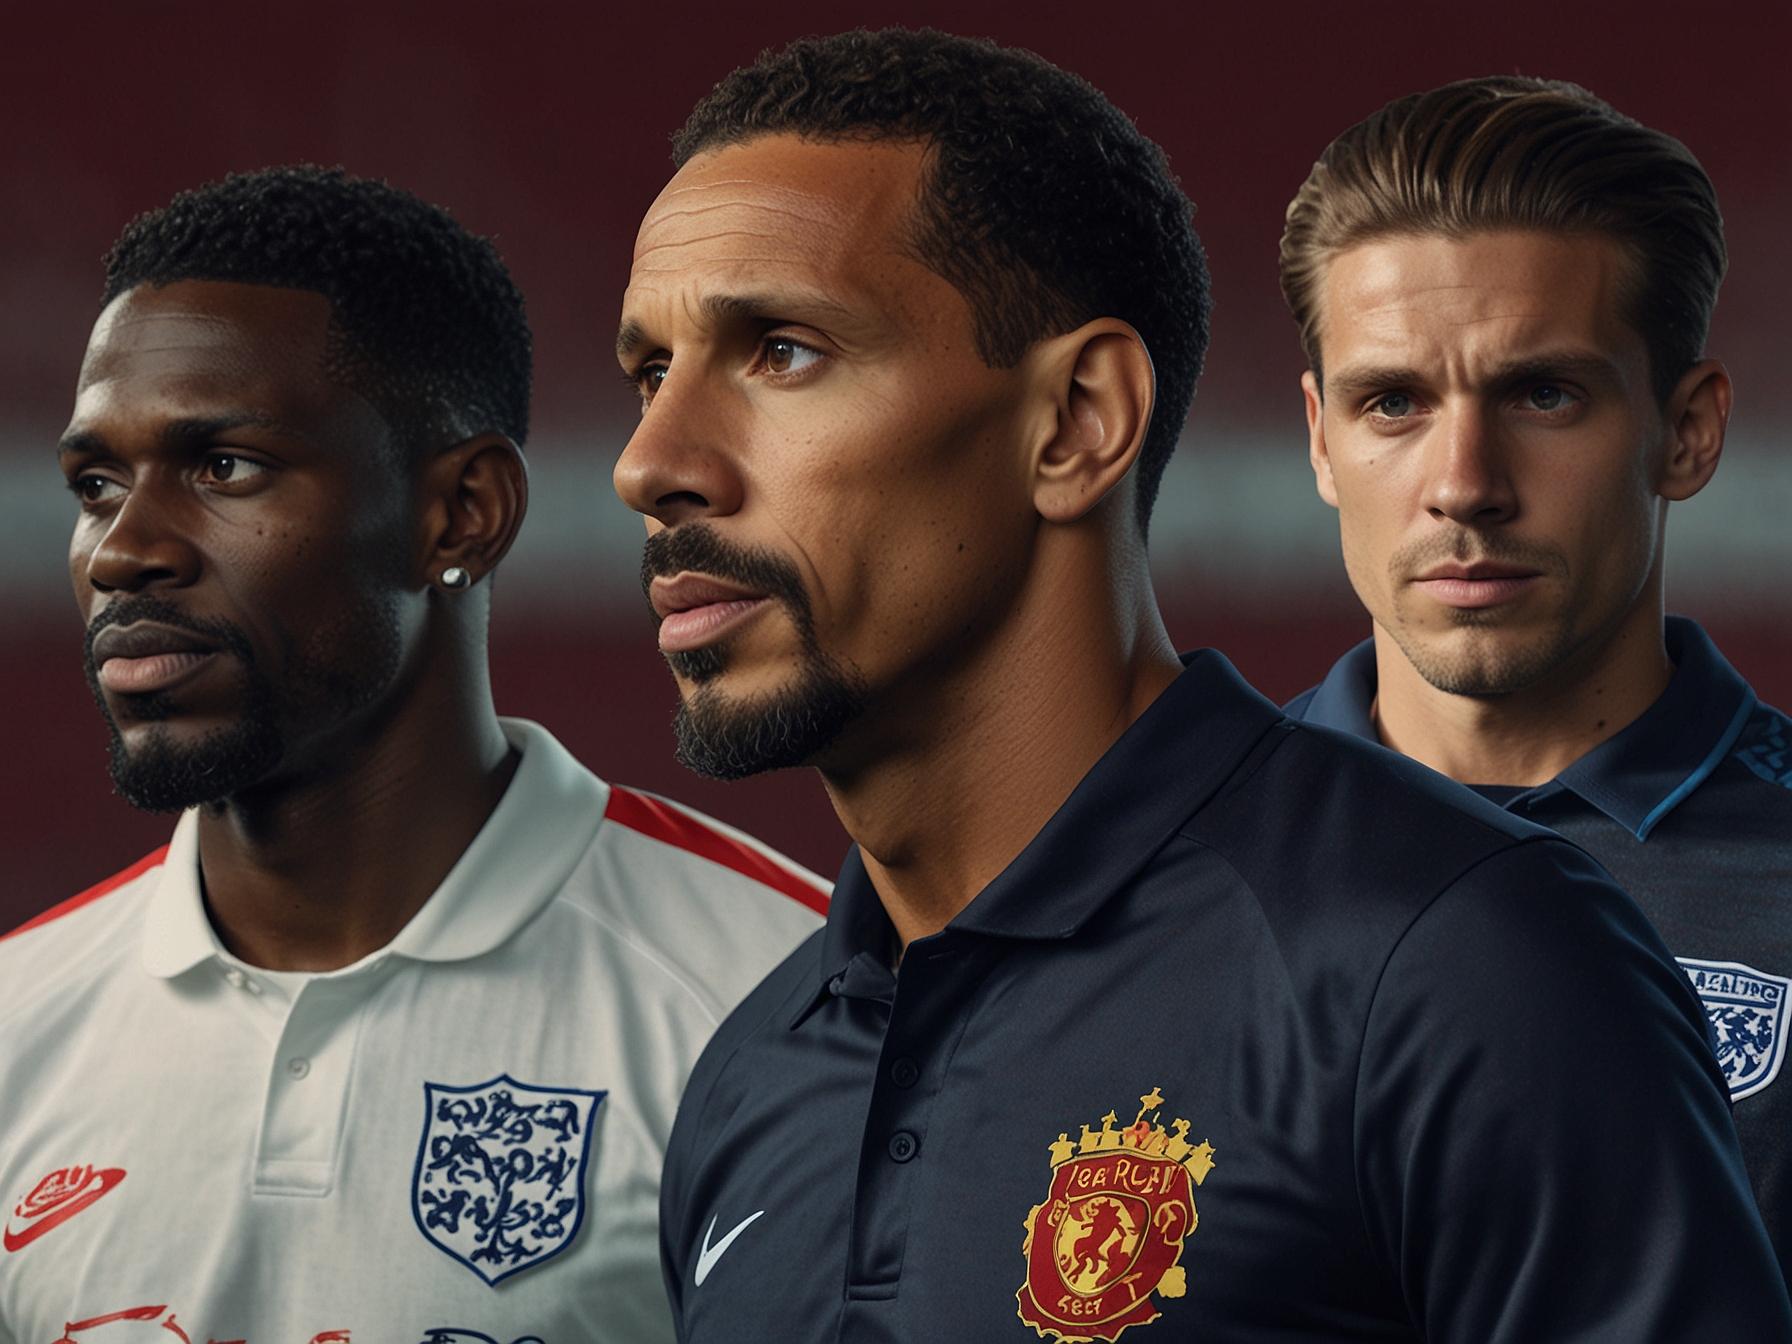 Rio Ferdinand defends his stance with emphasis, listing the merits of Grealish, Mount, and Saka as deserving England starters, while Micah Richards prepares his counter-arguments.